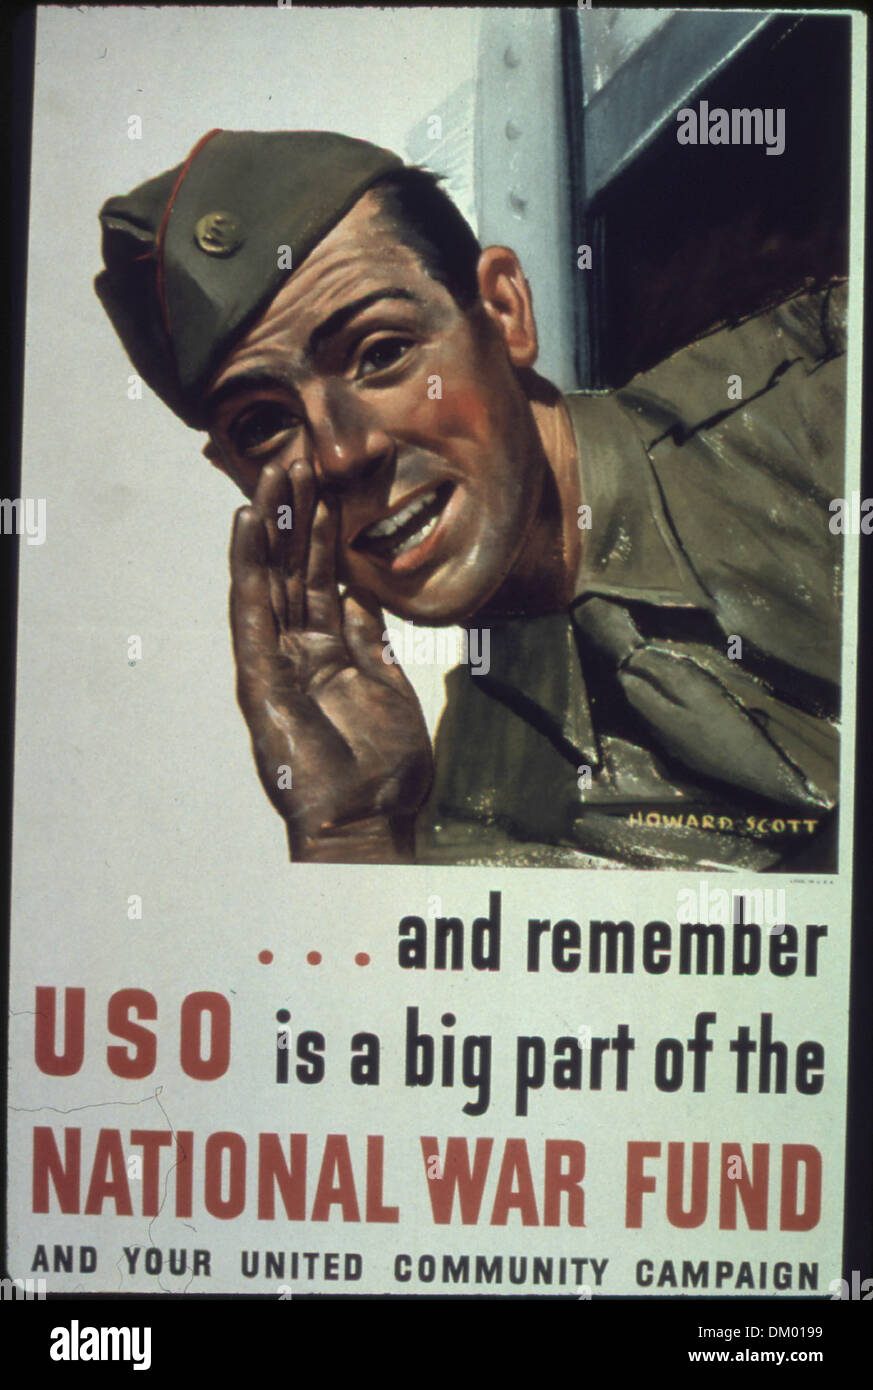 'And remember USO is a big part of the National War Fund' 513853 Stock Photo